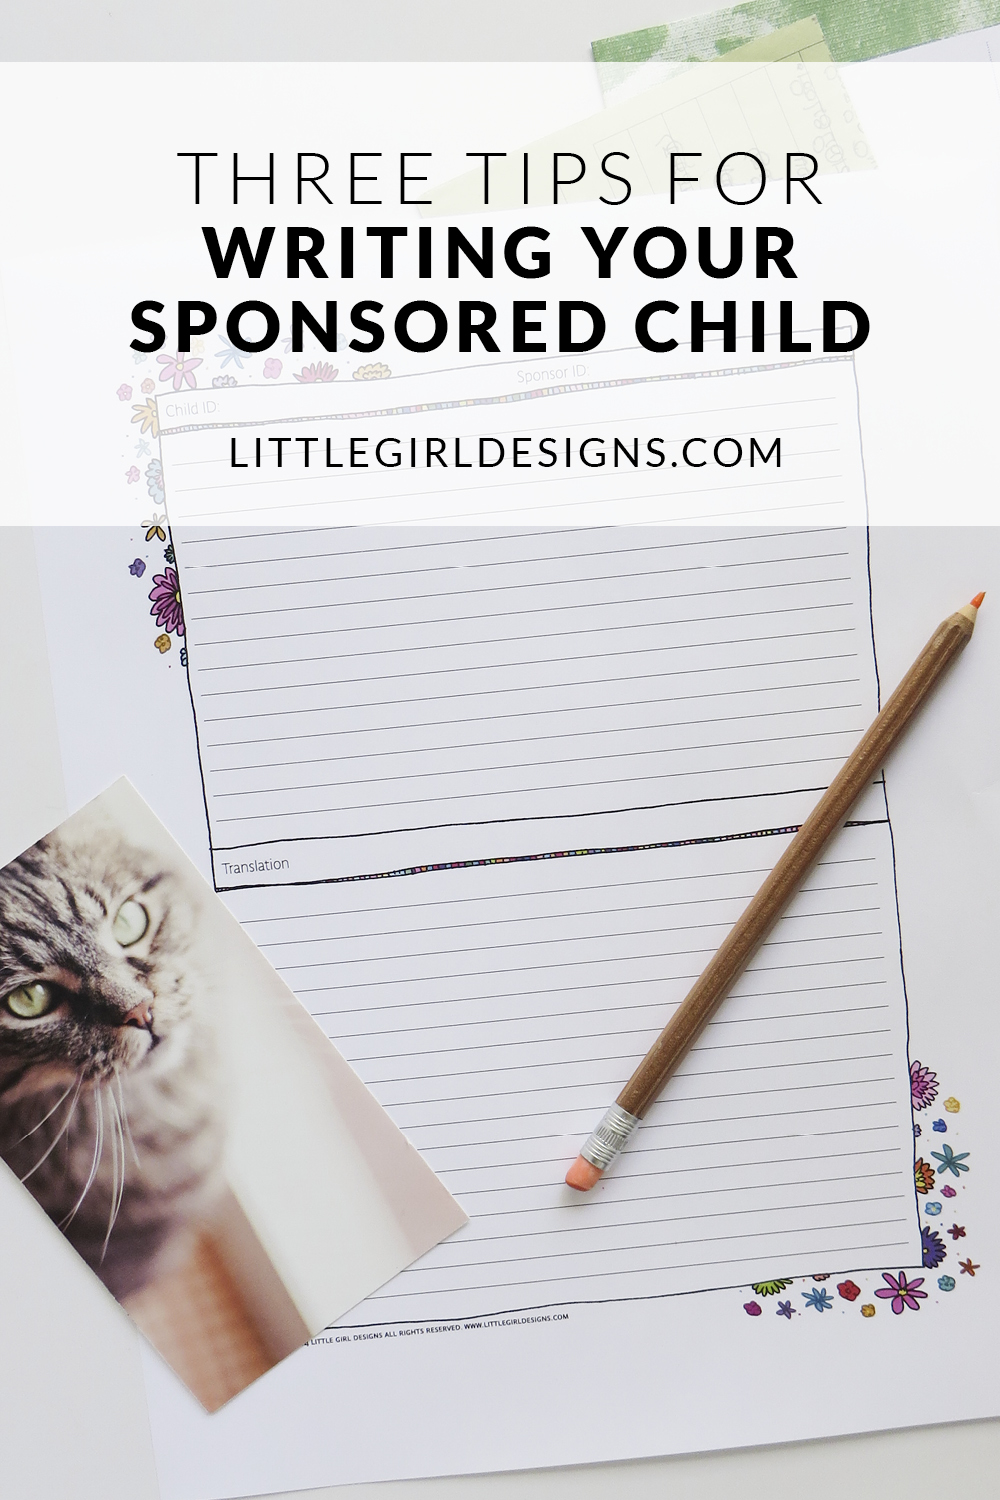 If you sponsor a child, you've probably learned how important it is to write your child. But what if you're not a natural letter-writer? What should you say? These tips will help you break through your writer's block AND you'll also be able to download a free stationery template for your letters!